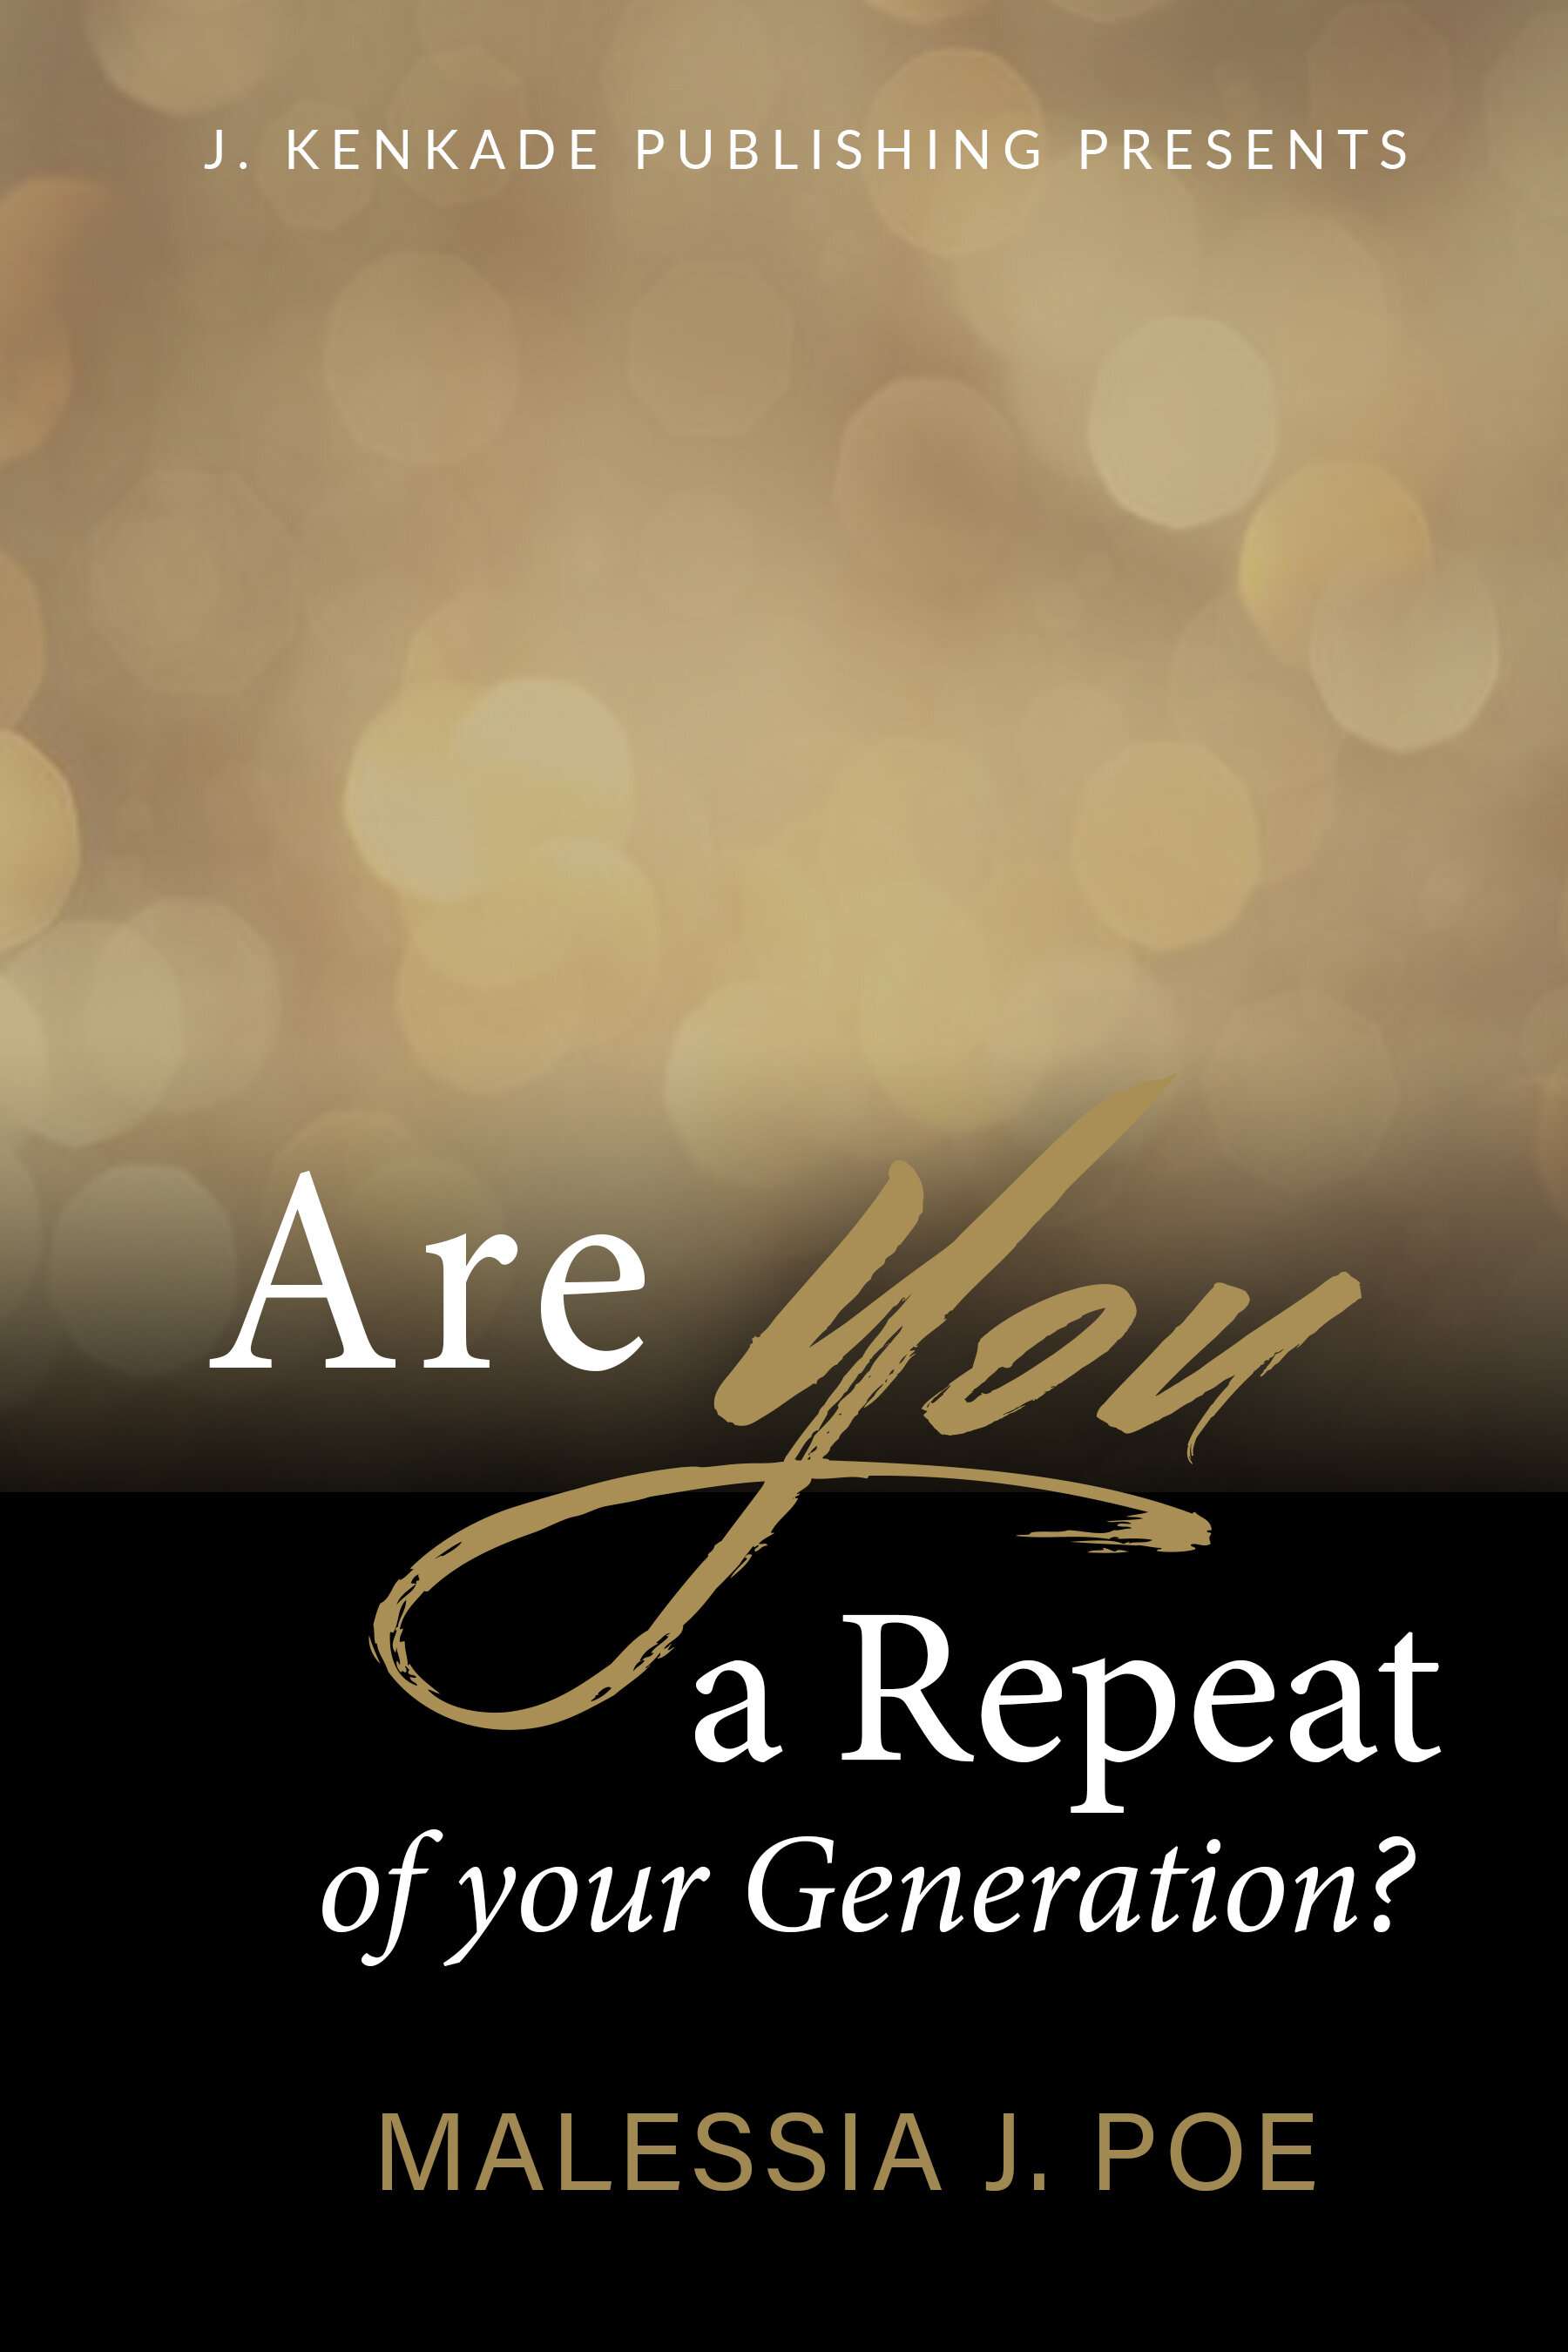 Are you a Repeat of Your Generation?